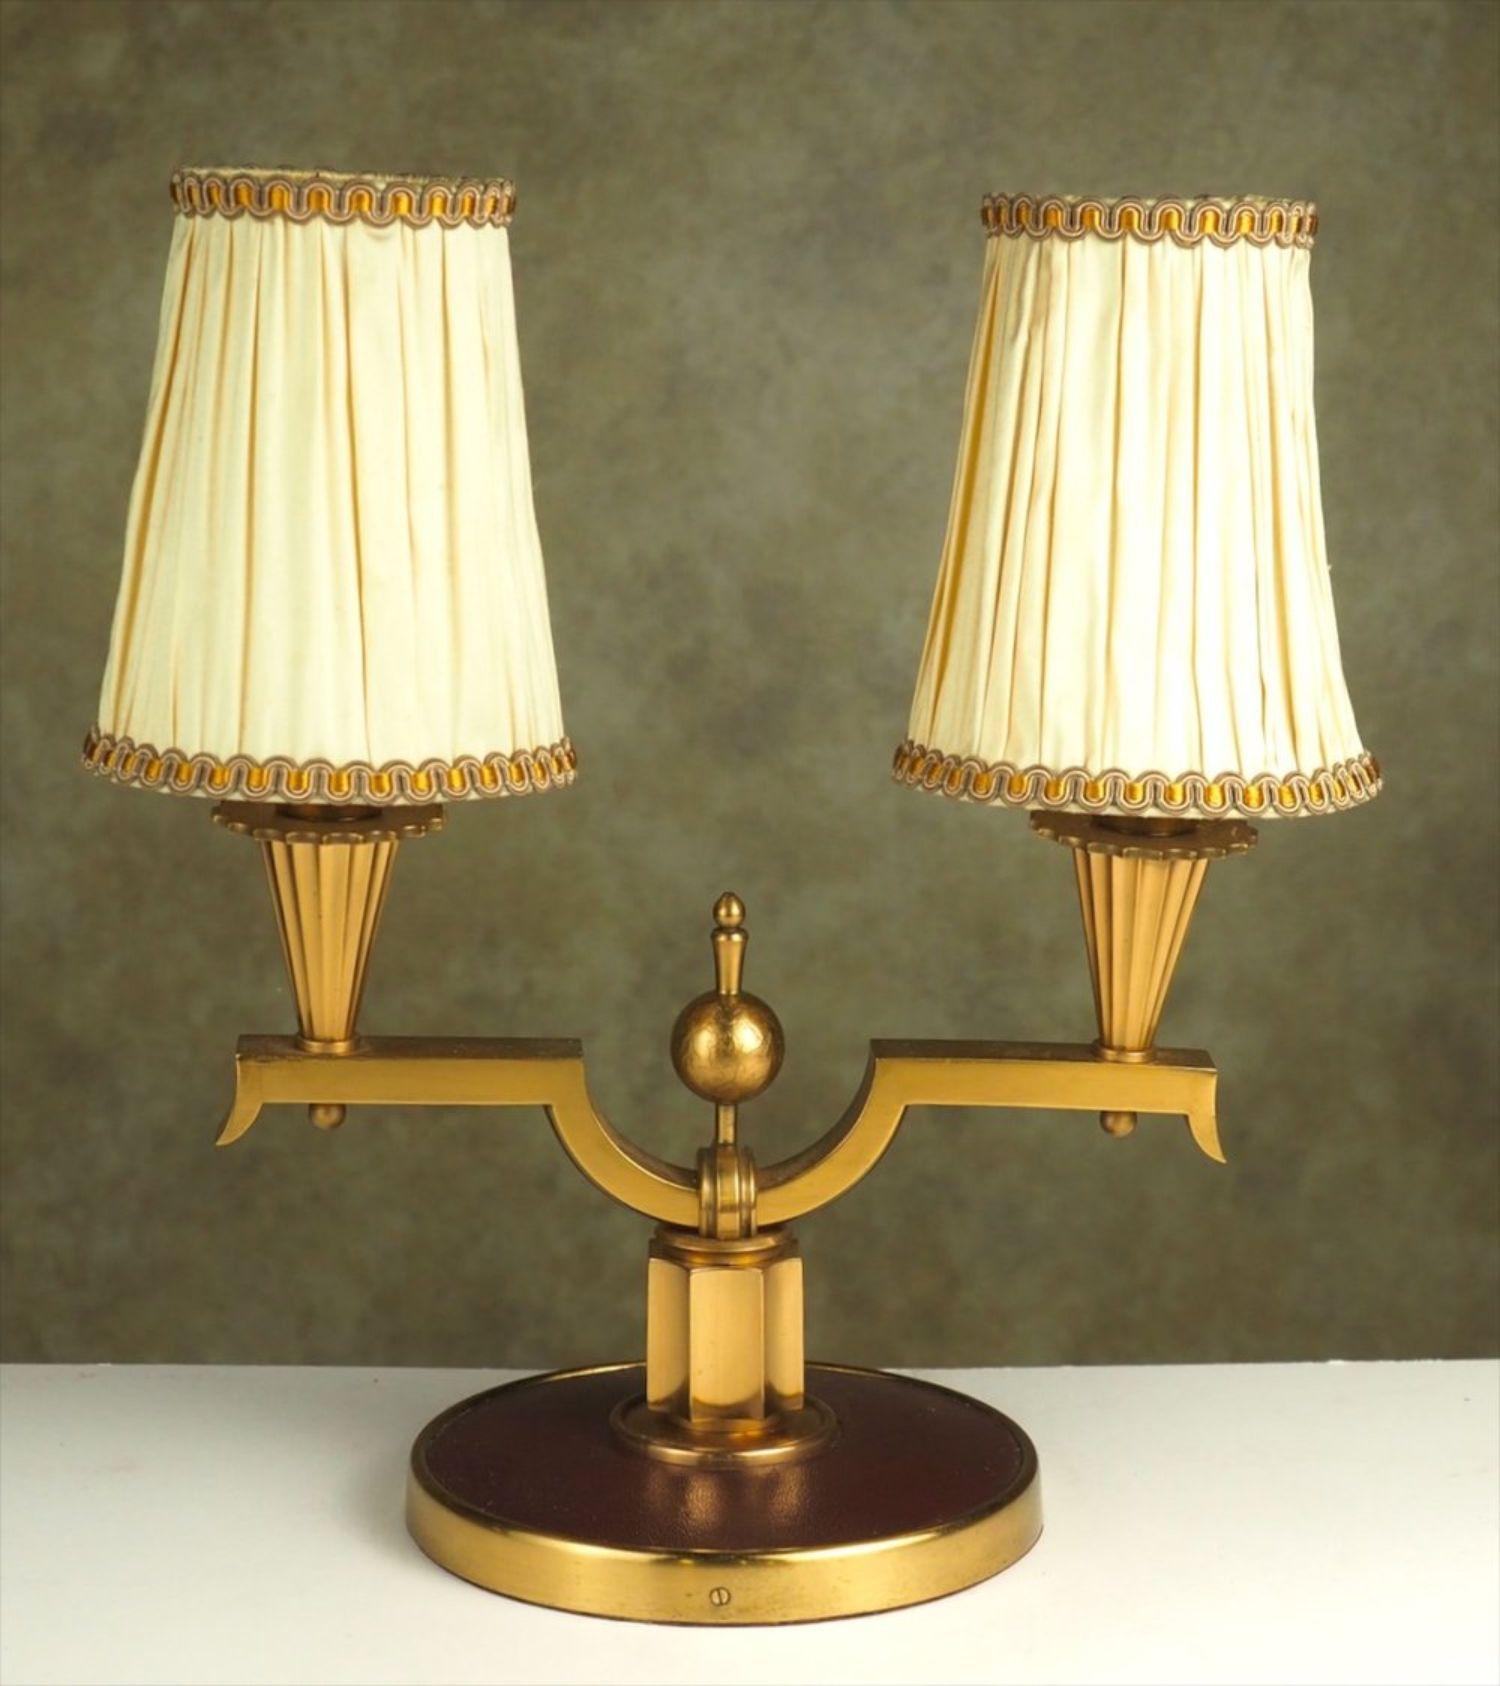 French 1940s Art Deco pair of two-branch lamps, by Genet et Michon in gilt bronze and original leather. Shades are re-covered original frames. Measures: 14